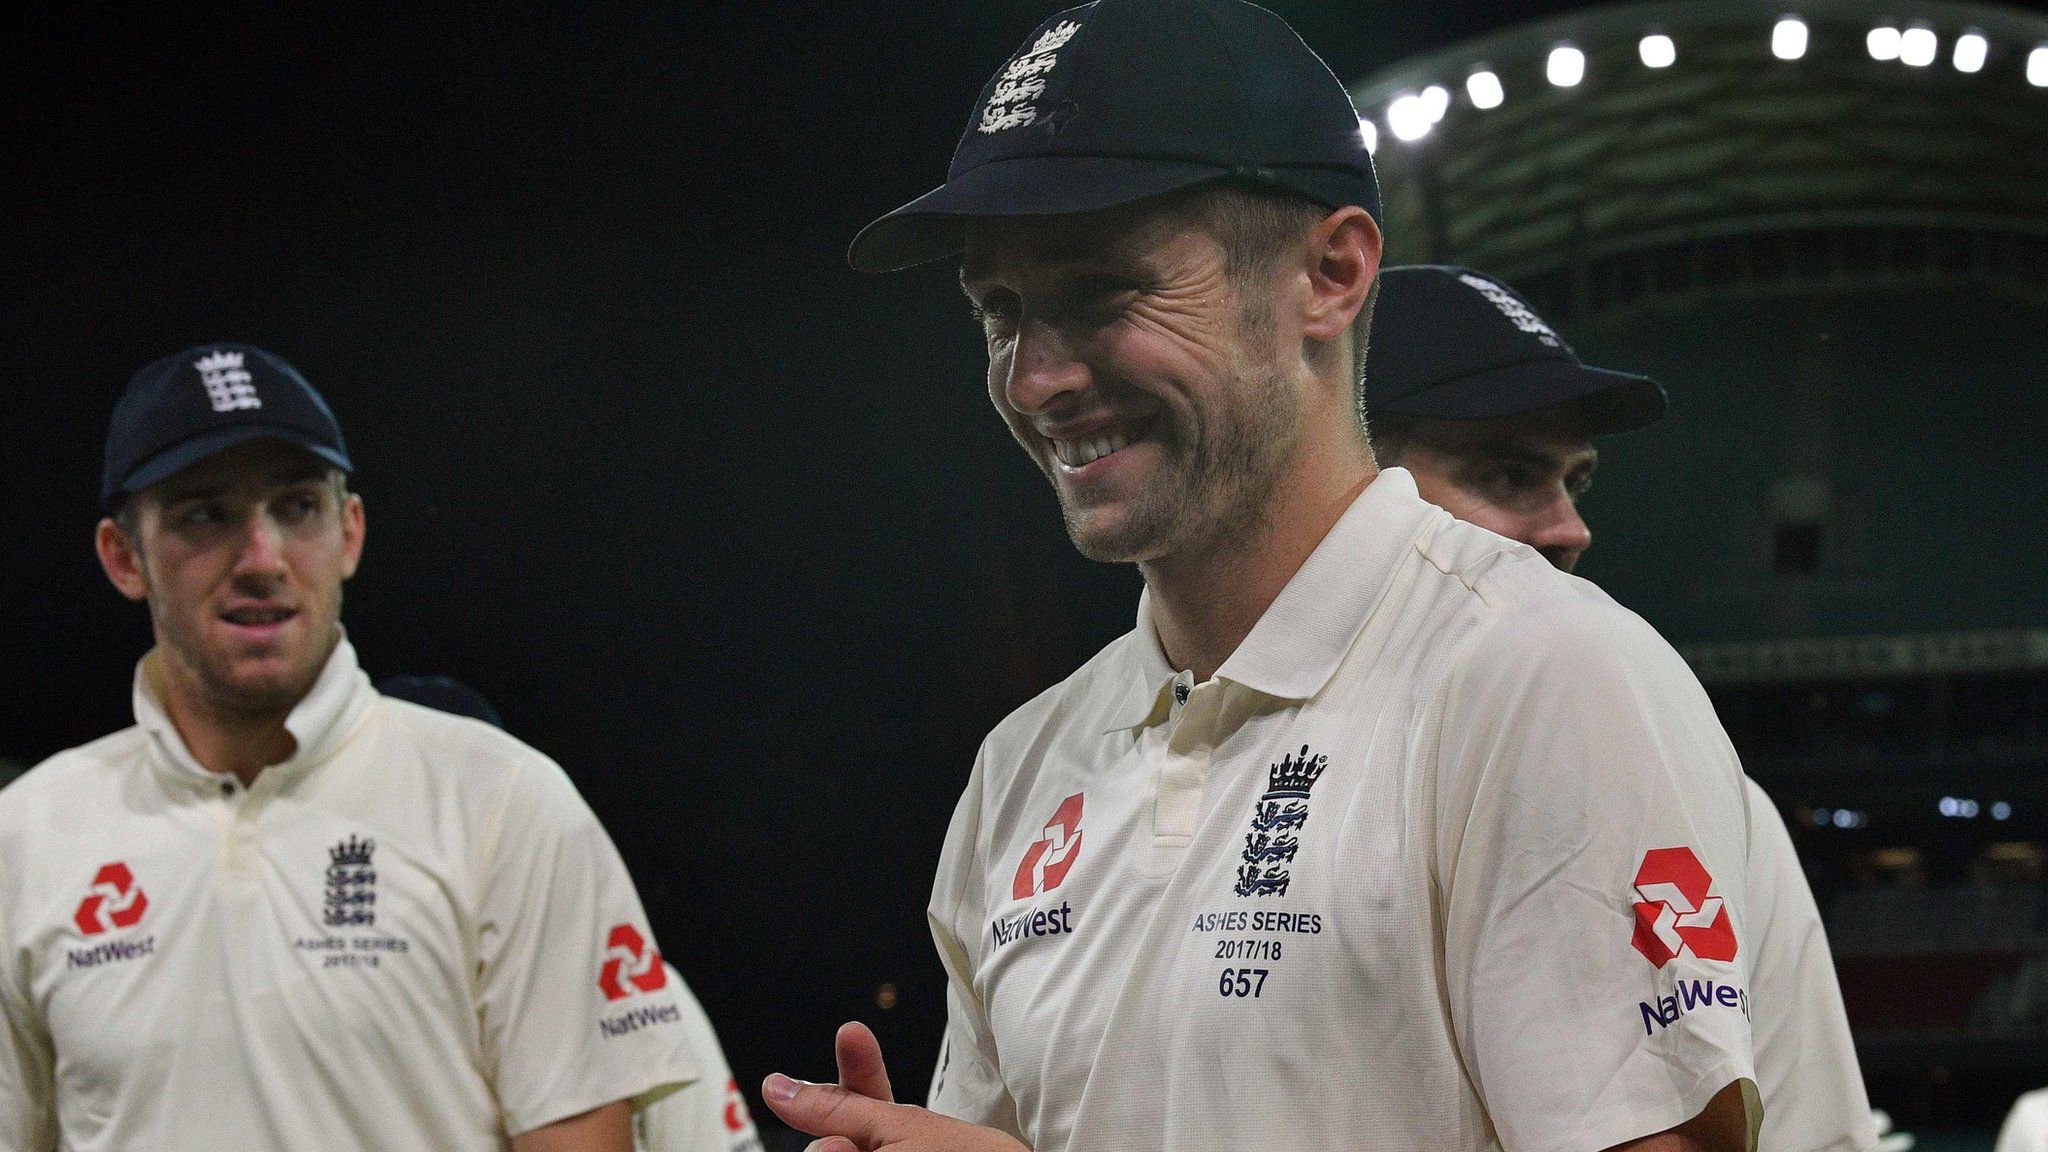 Chris Woakes walks off smiling at the end of the third day